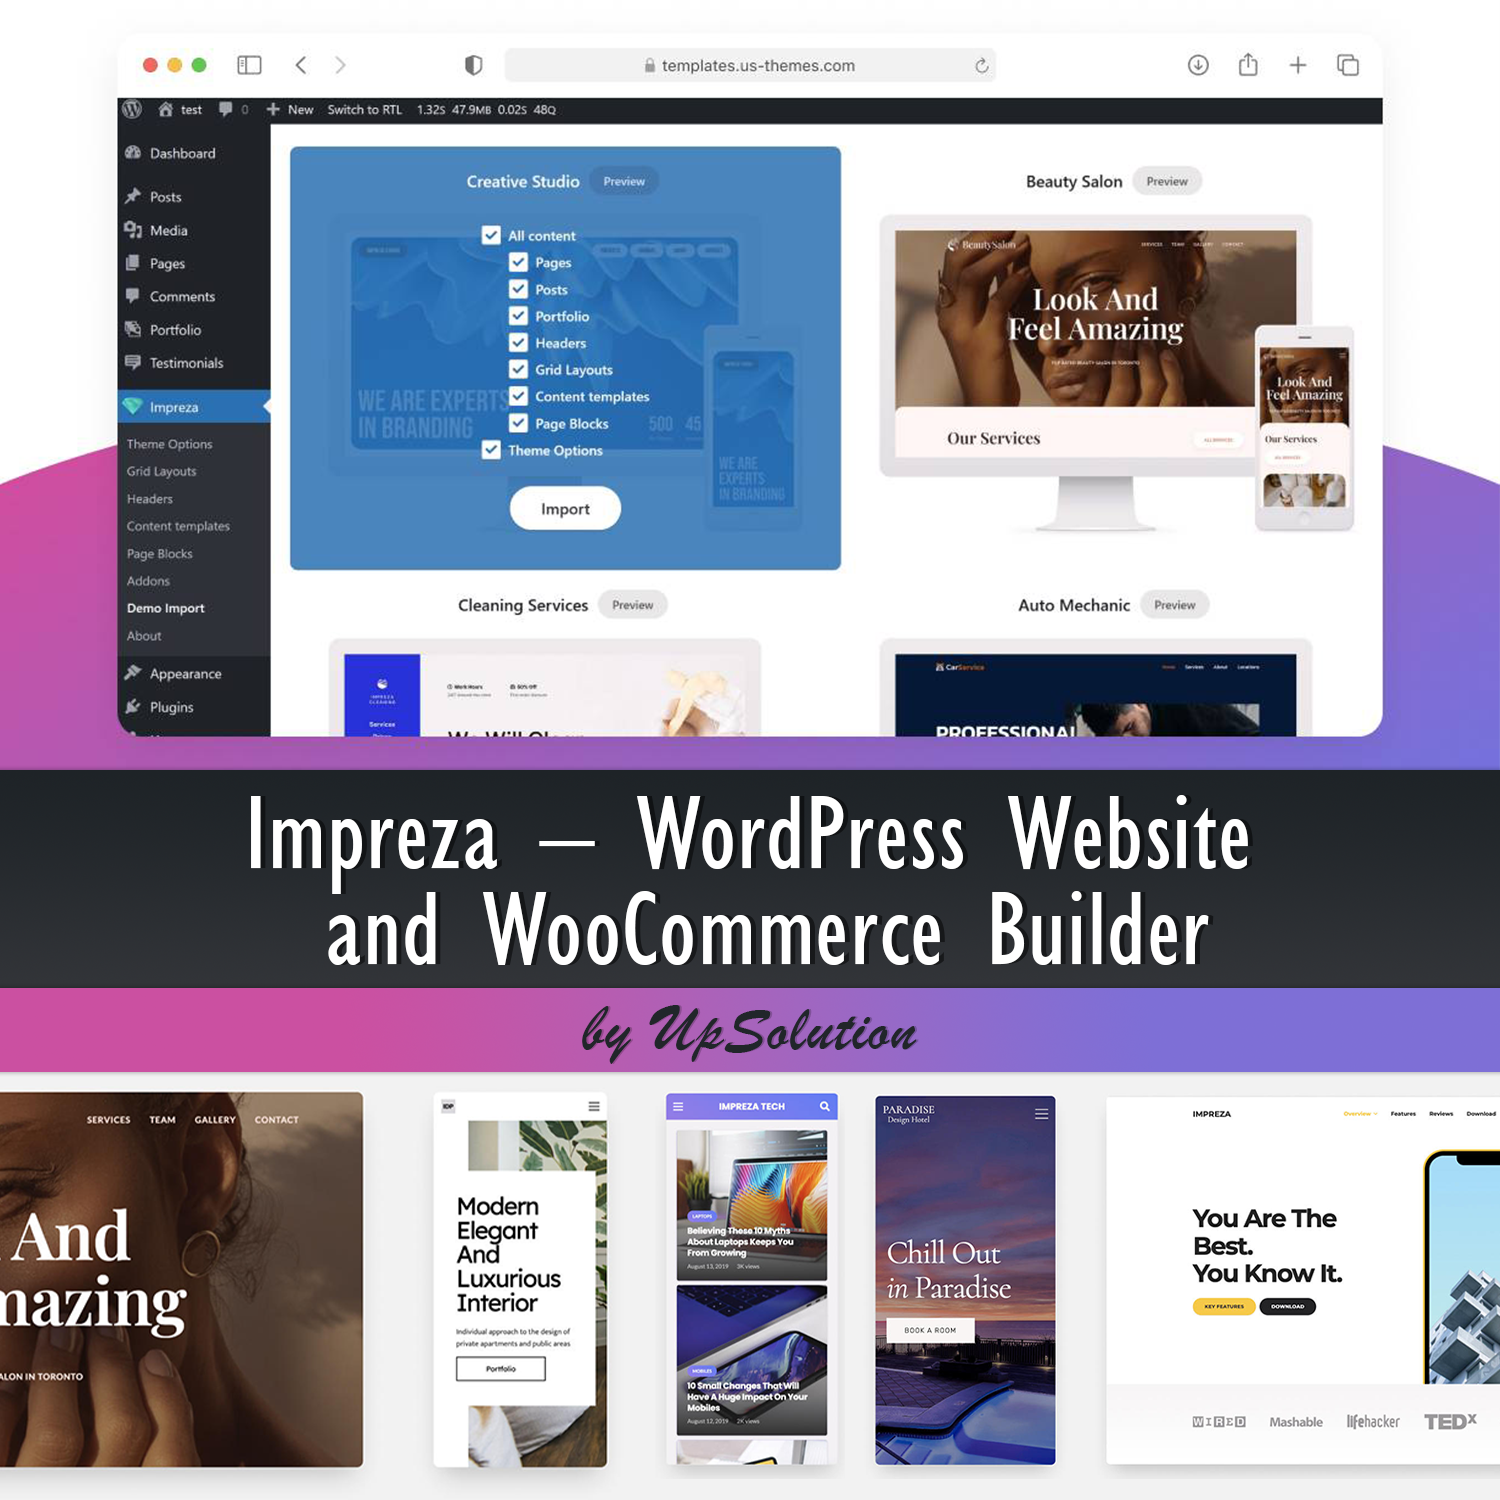 Images with impreza – wordpress website and woocommerce builde.